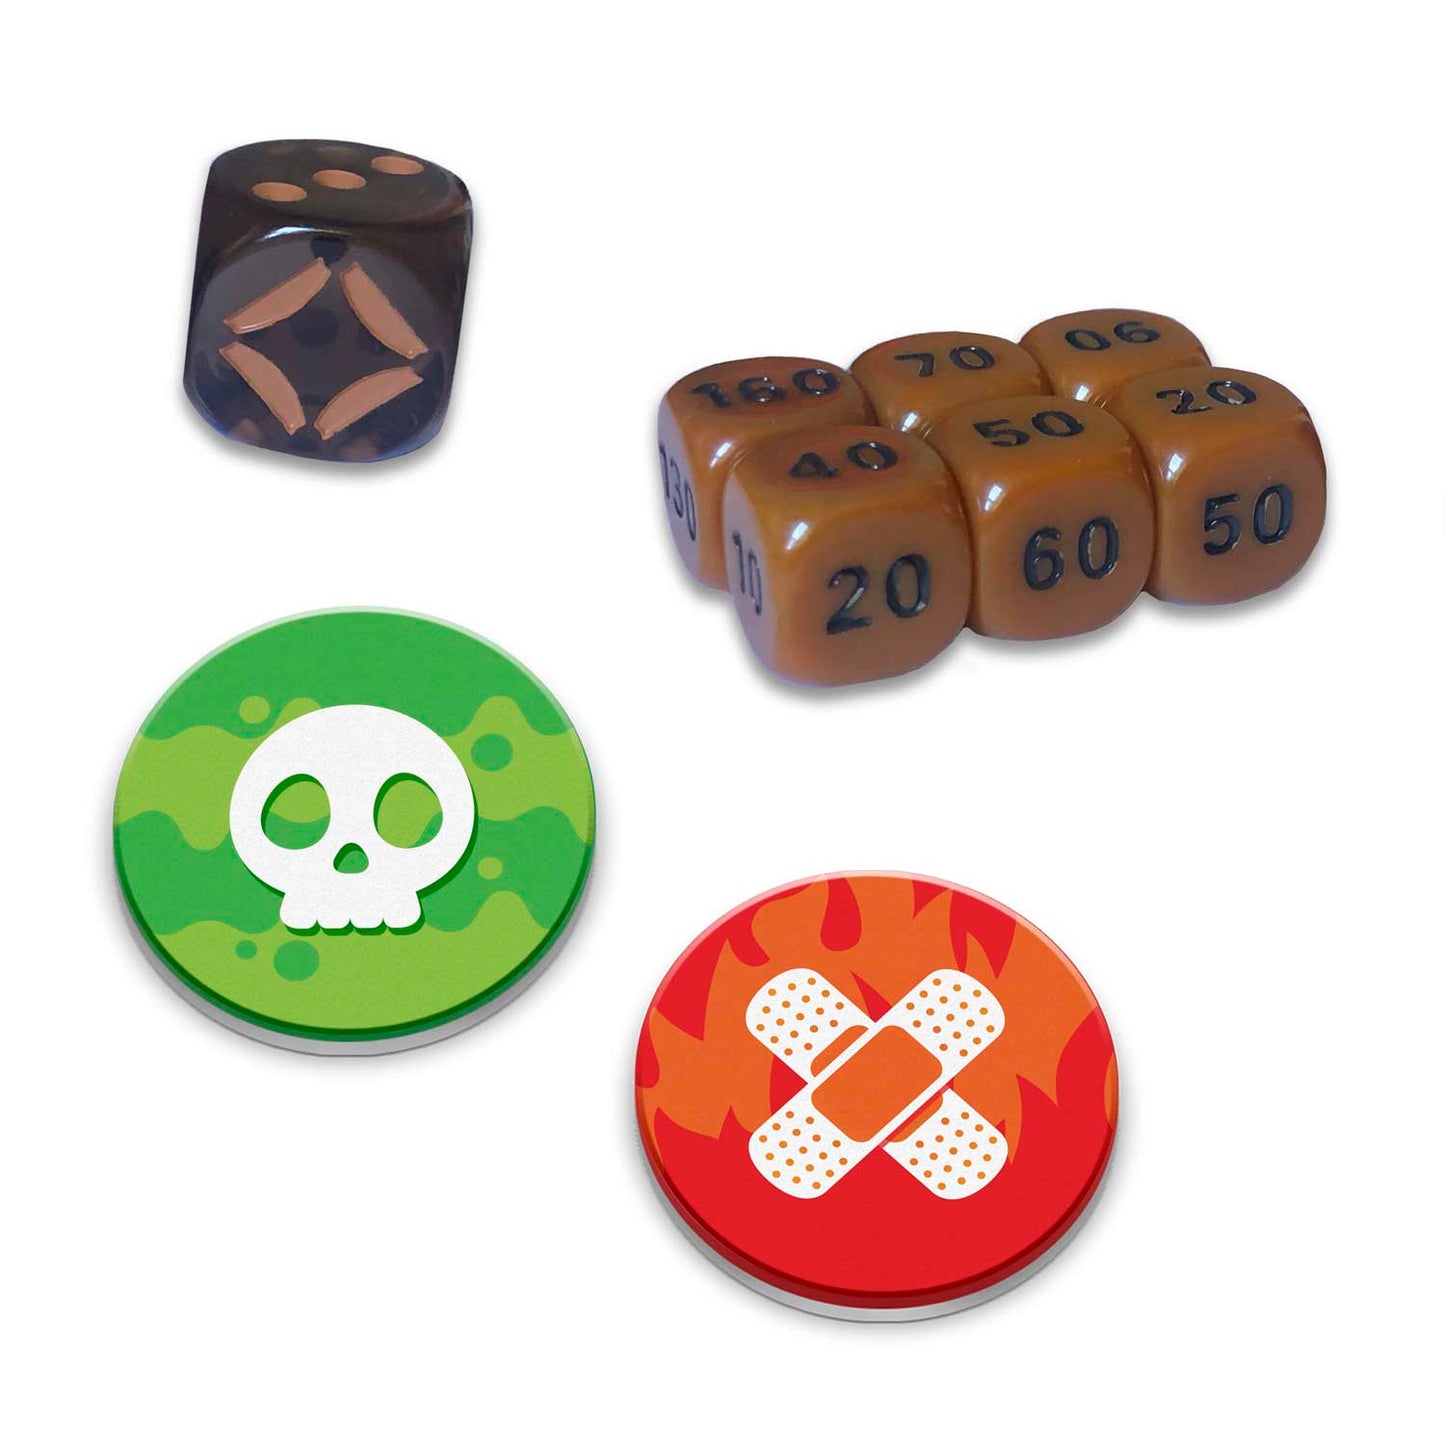 Damage counters, and dice are also included in the Elite Trainer Box.